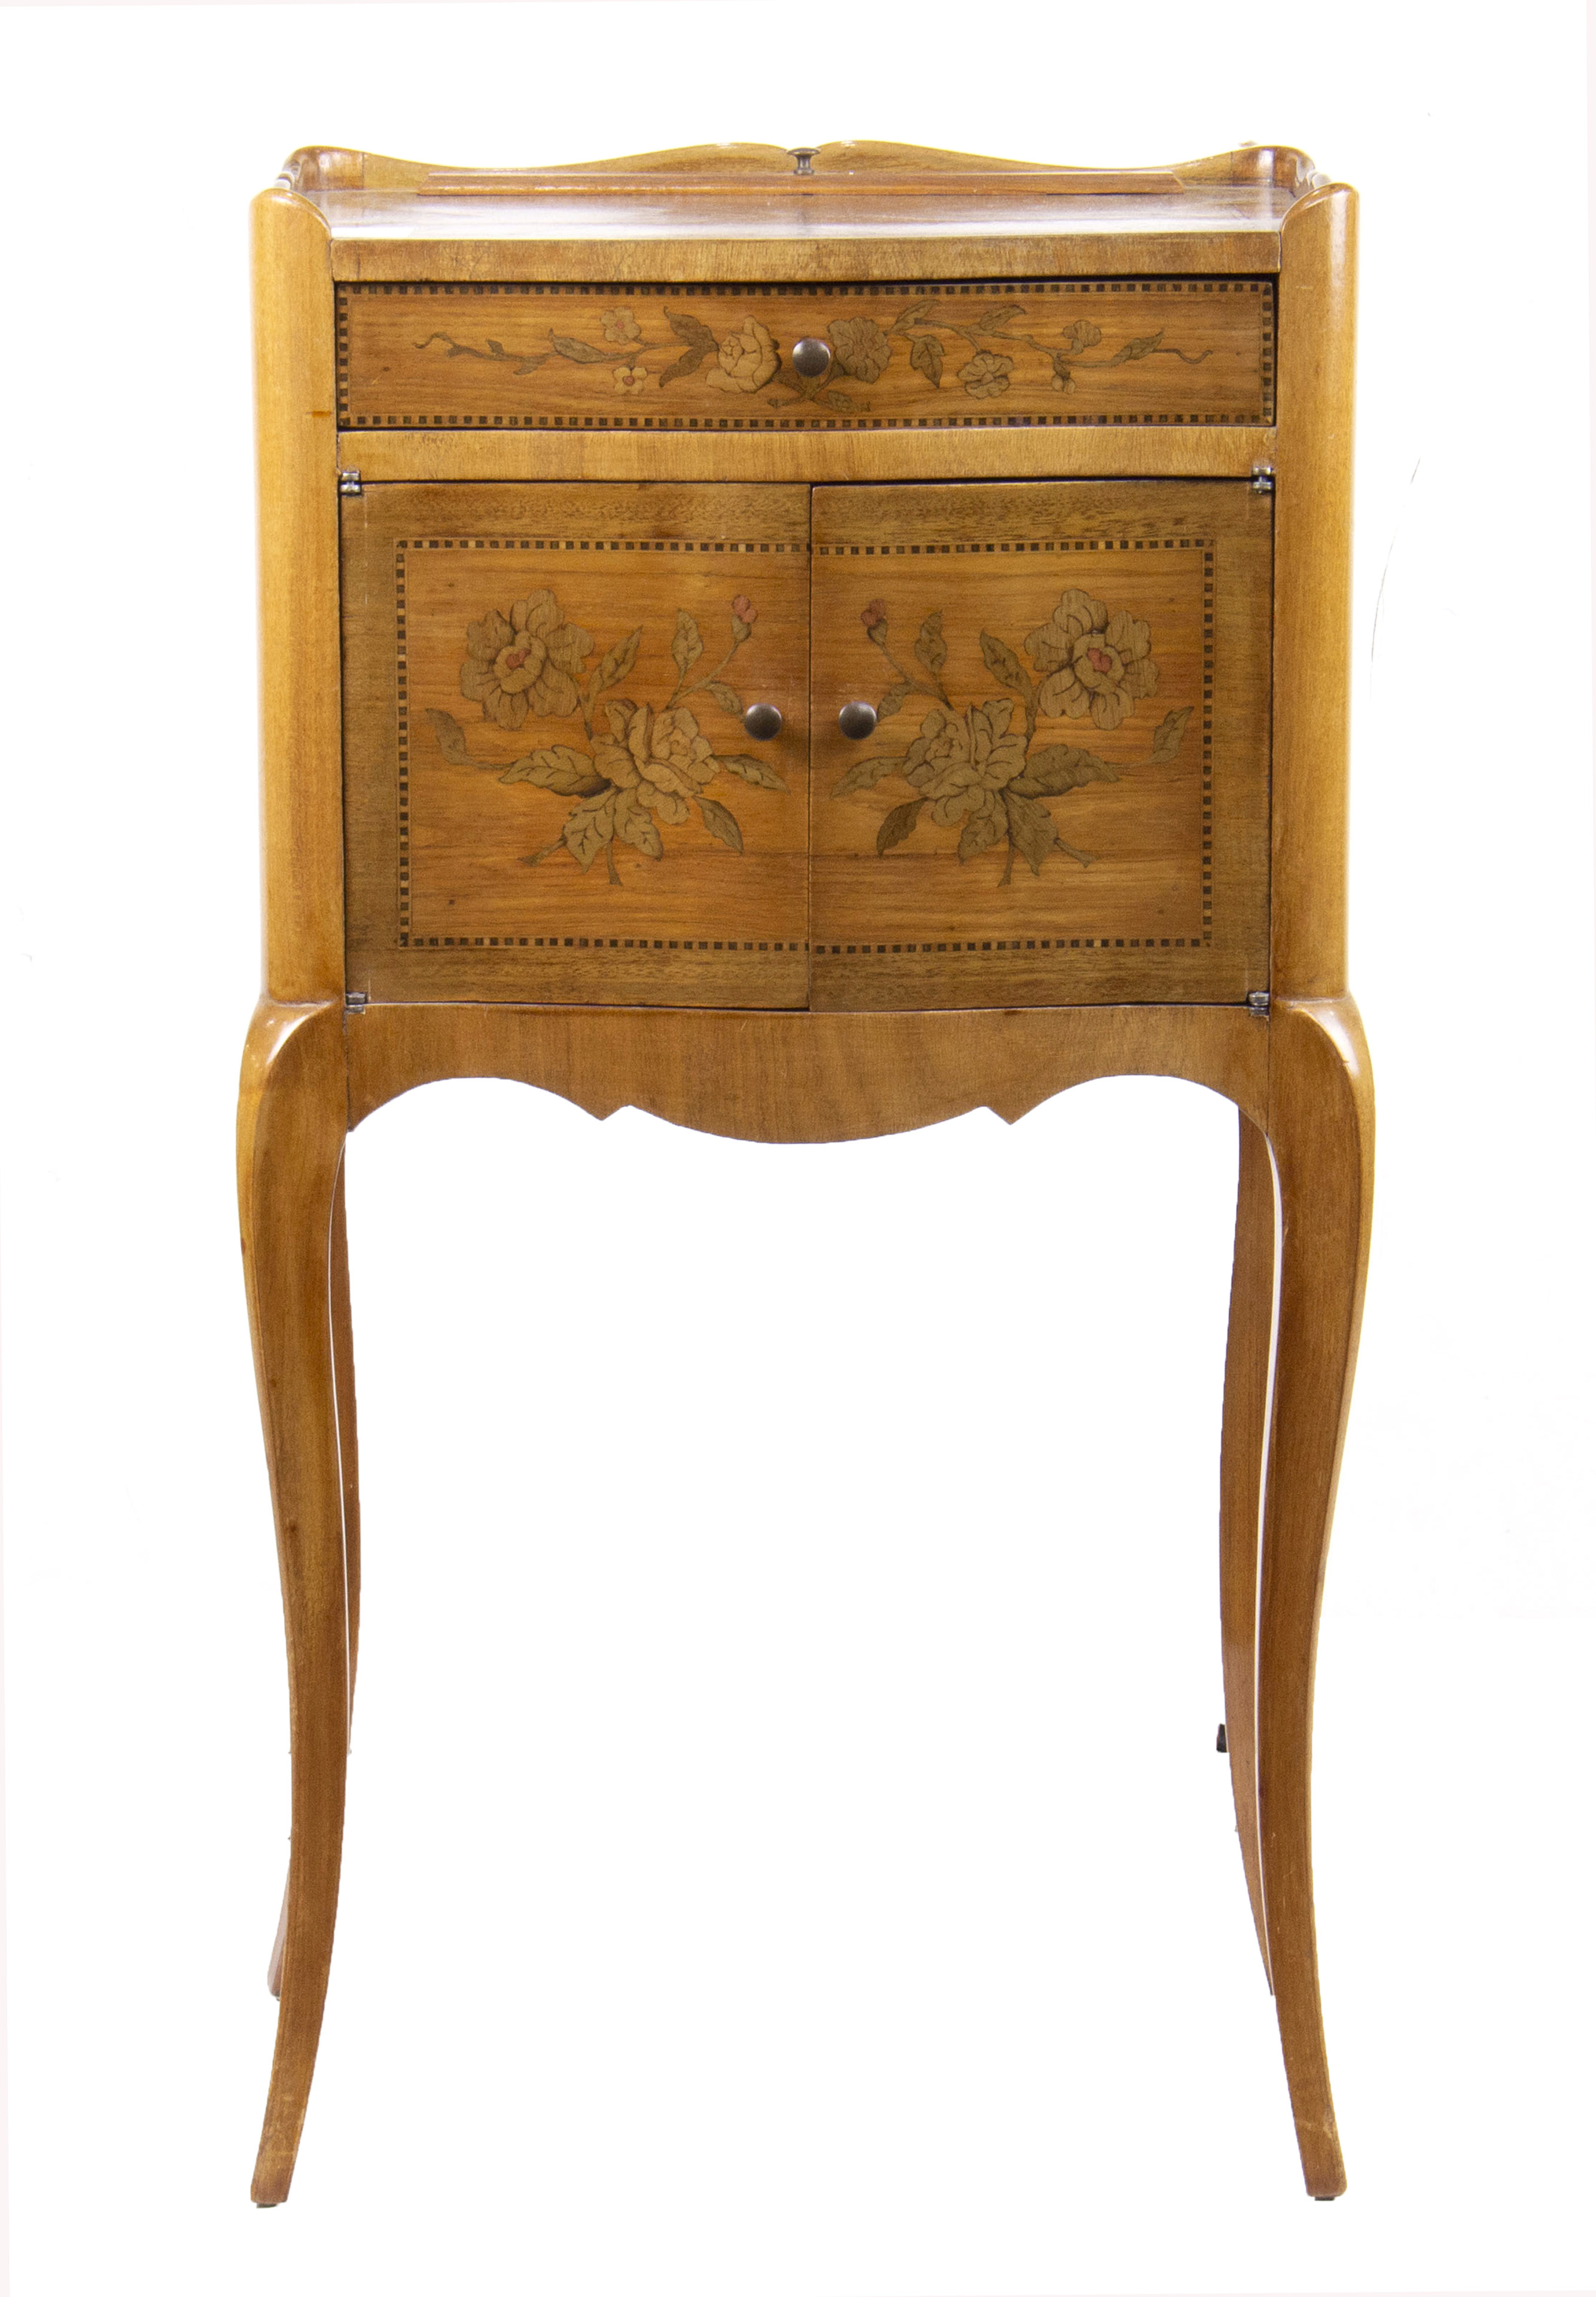 FRENCH PROVINCIAL INLAID DRESSING 3a4ca6